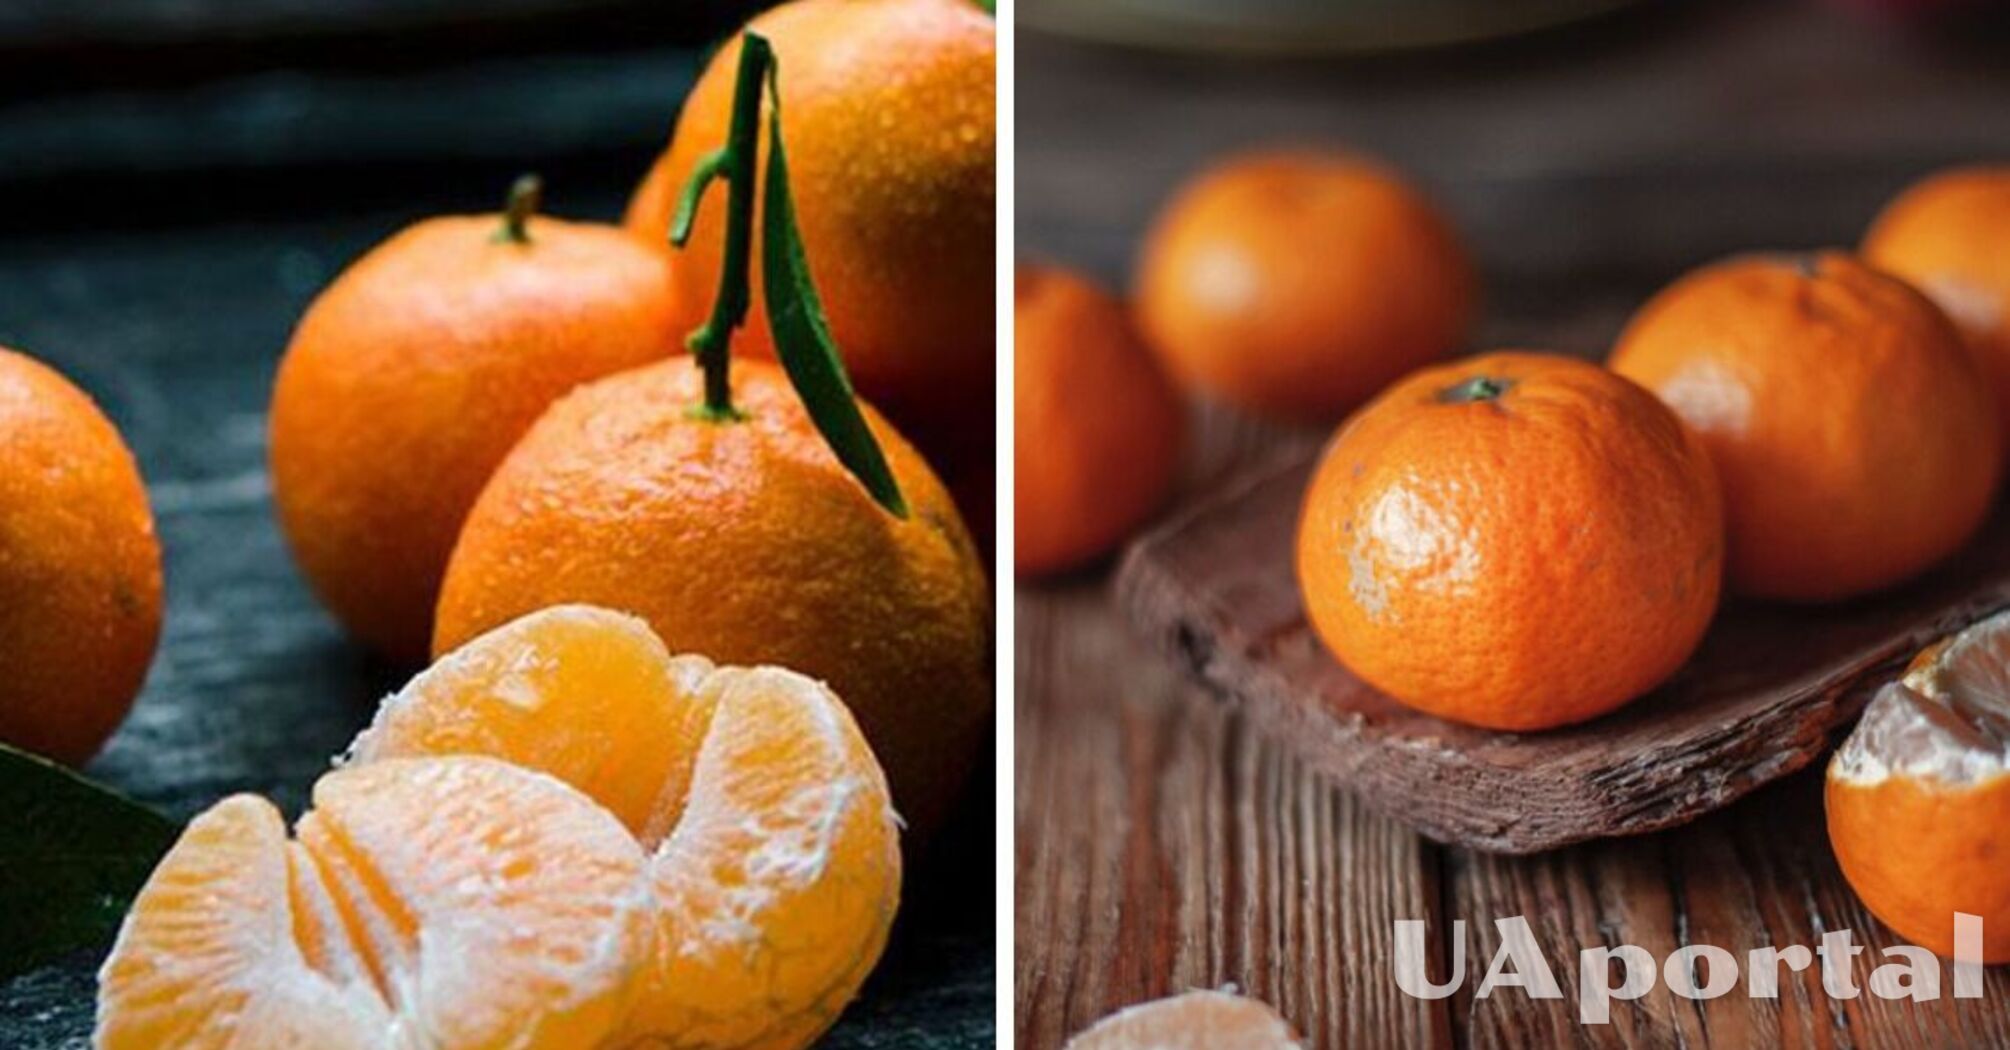 How to choose quality and sweet tangerines